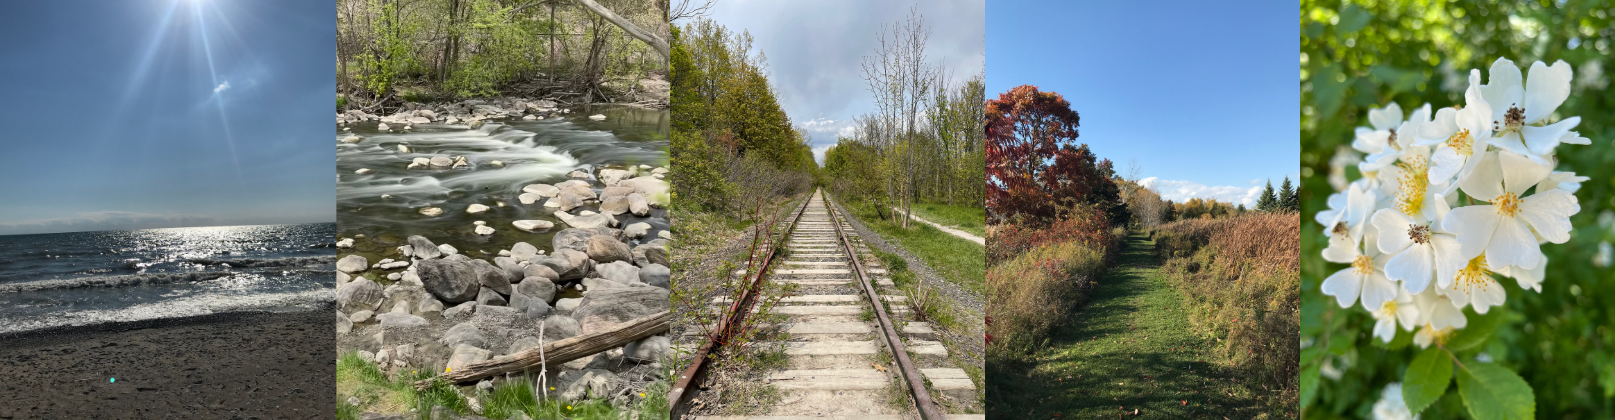 Five photos of Toronto's ravines and natural parks showing rivers, forests, and flowers turned into one image collage.